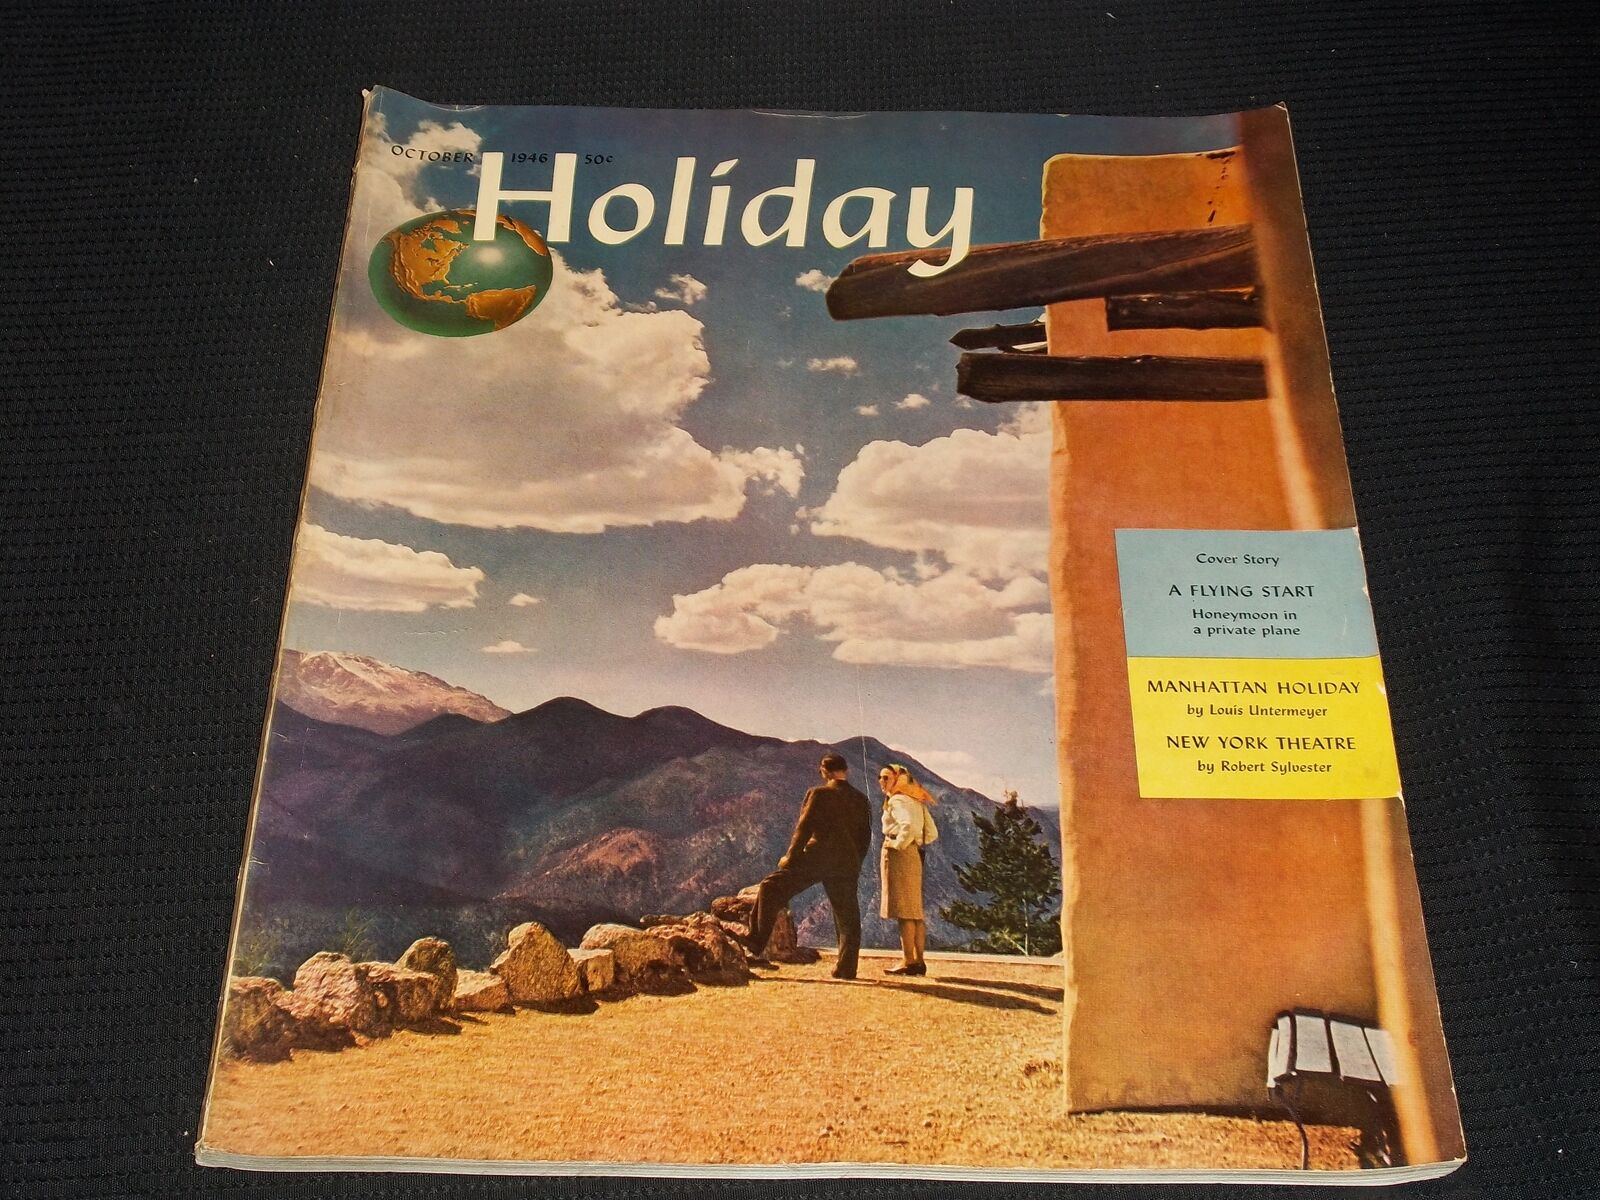 1946 OCTOBER HOLIDAY MAGAZINE - CHEYENNE MOUTAIN COLORADO FRONT COVER - E 1243